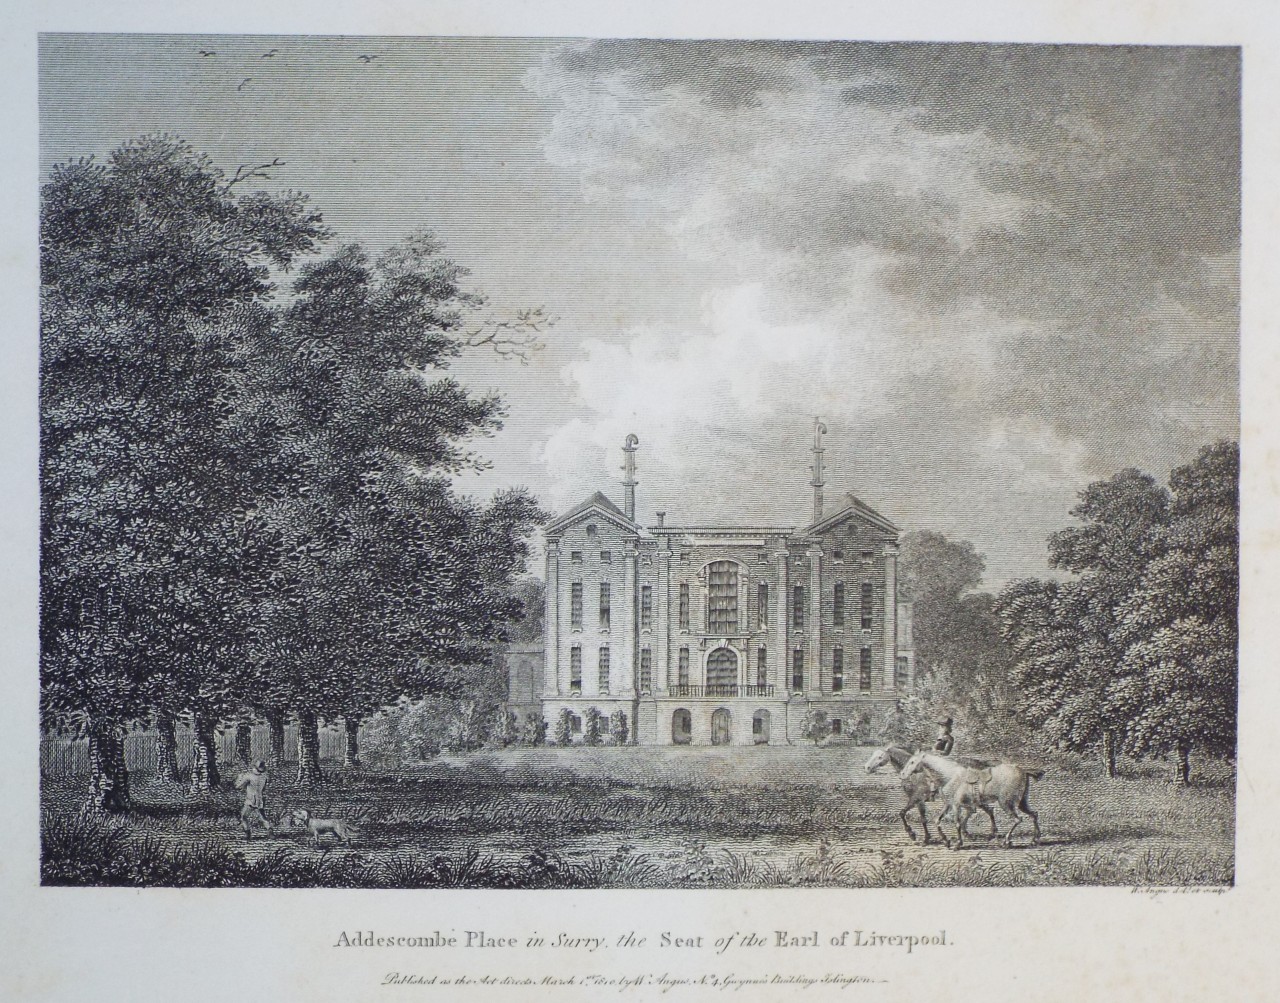 Print - Addescombe Place in Surry, the Seat of the Earl of Liverpool. - Angus